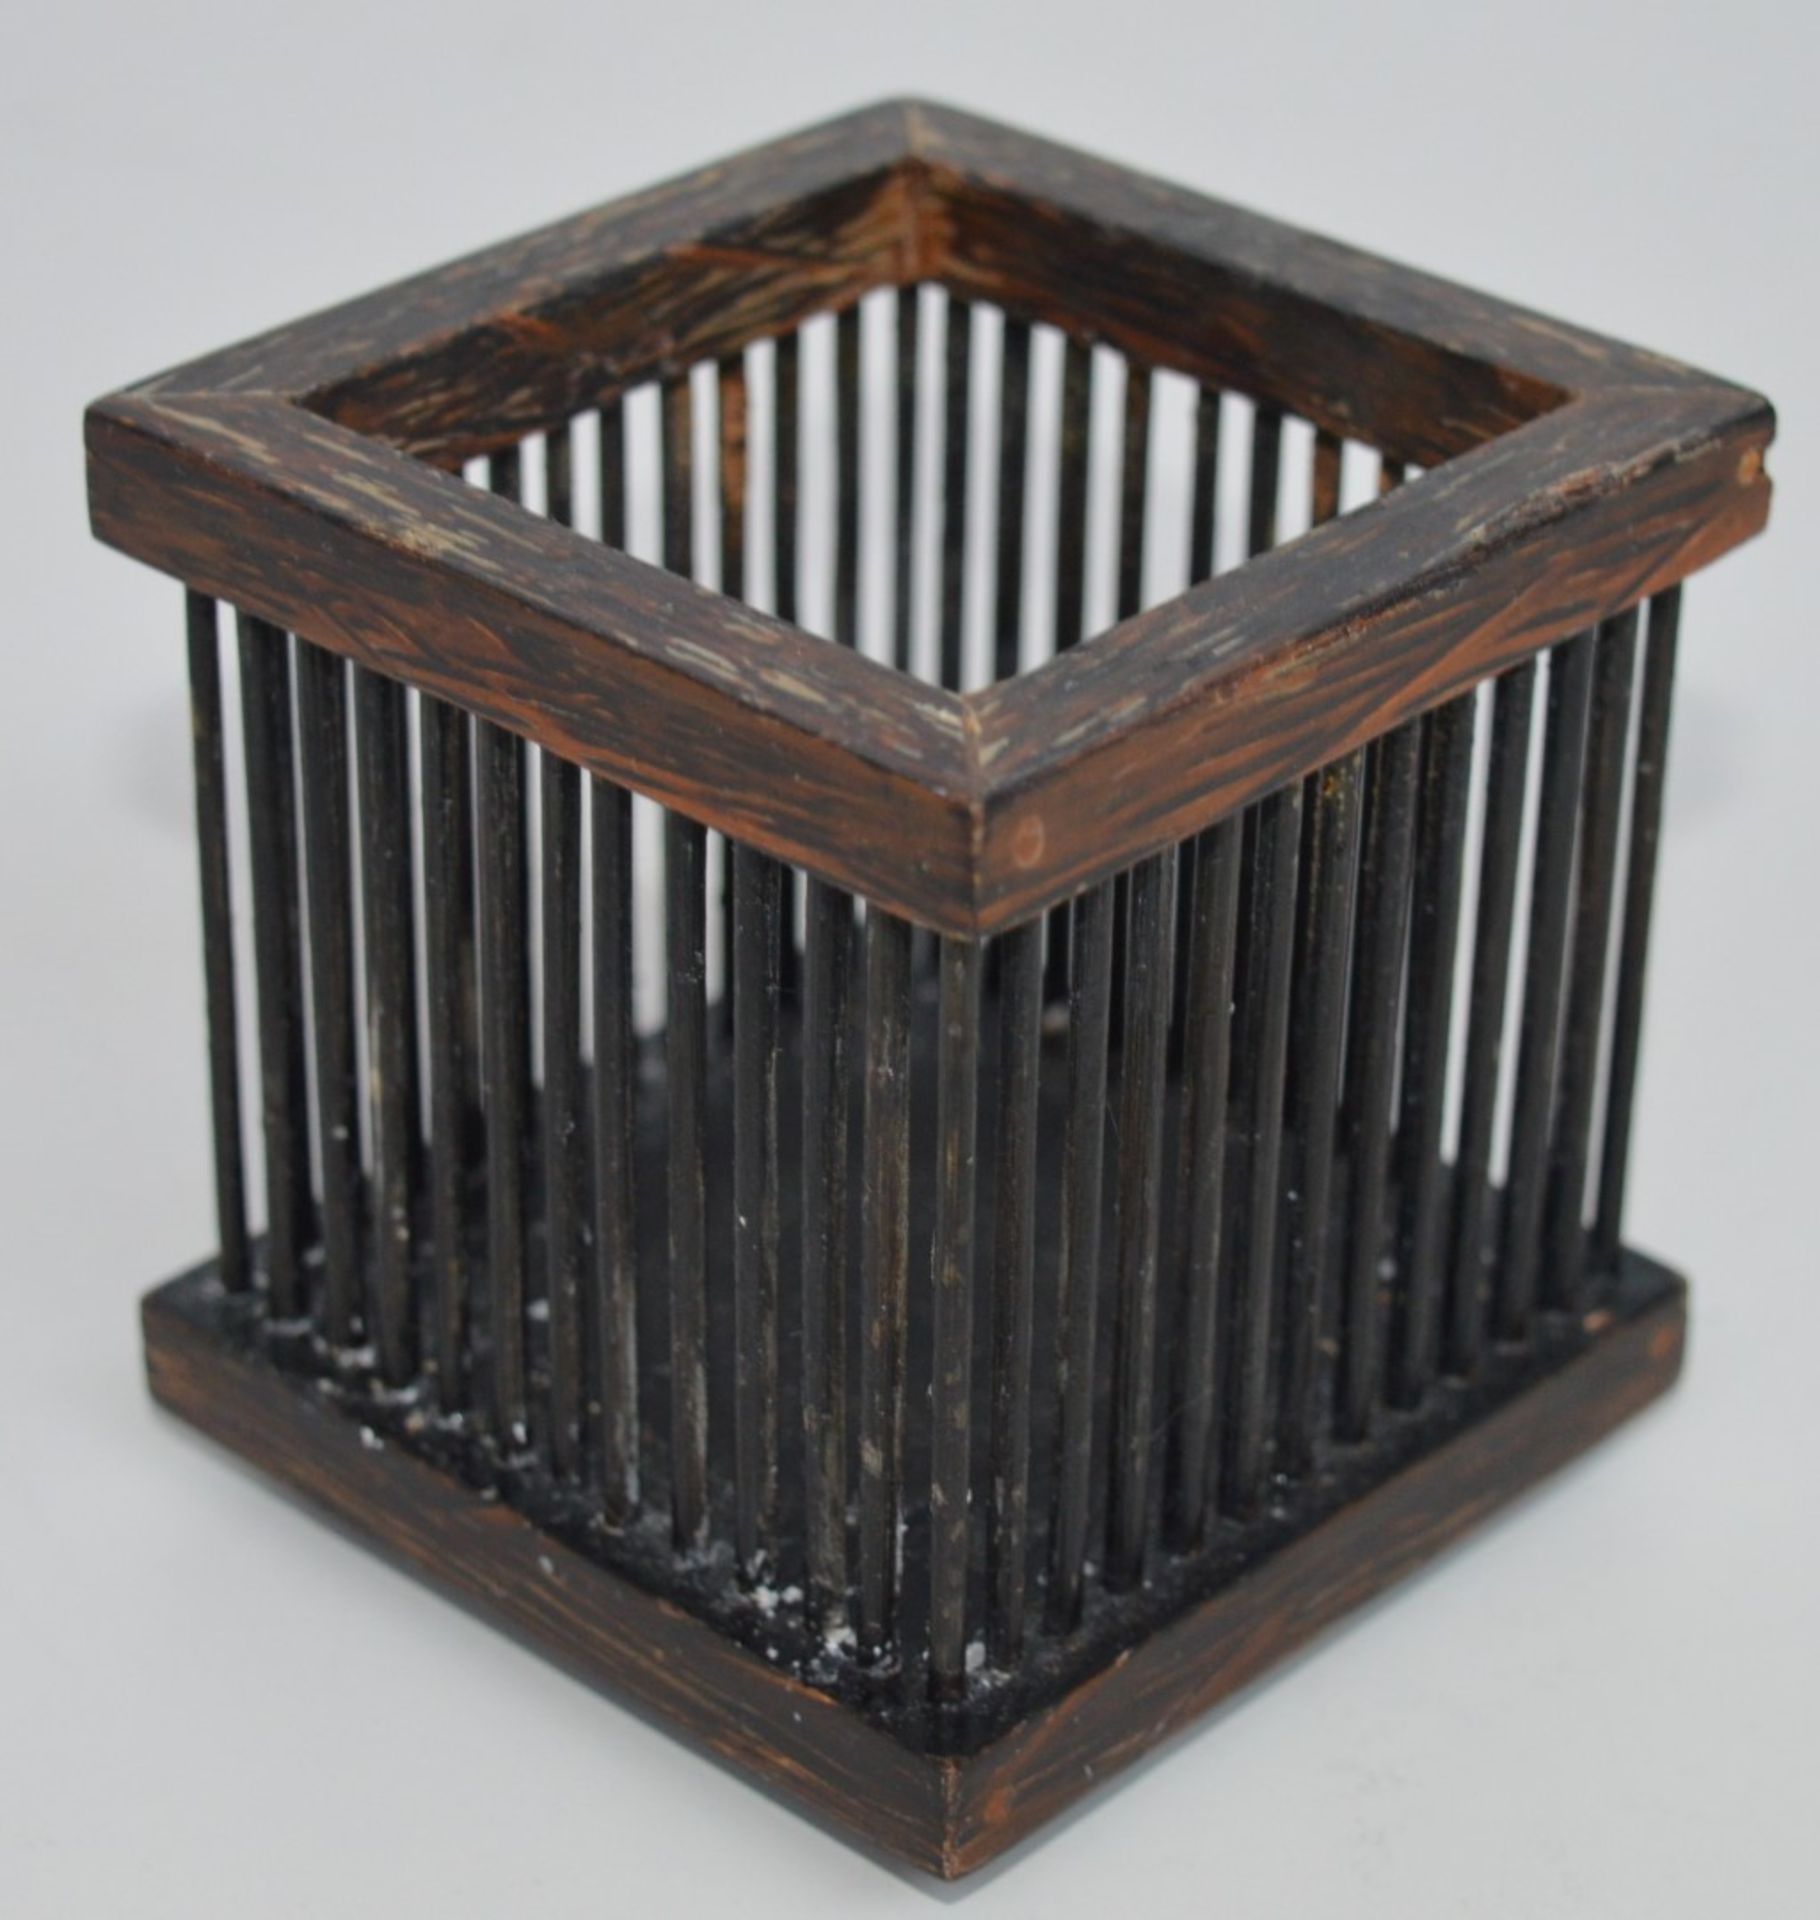 53 x Wooden Candle Holders - Cage Style With Rubber Bases - Ideal For Restaurants etc - Size 8.5x8.